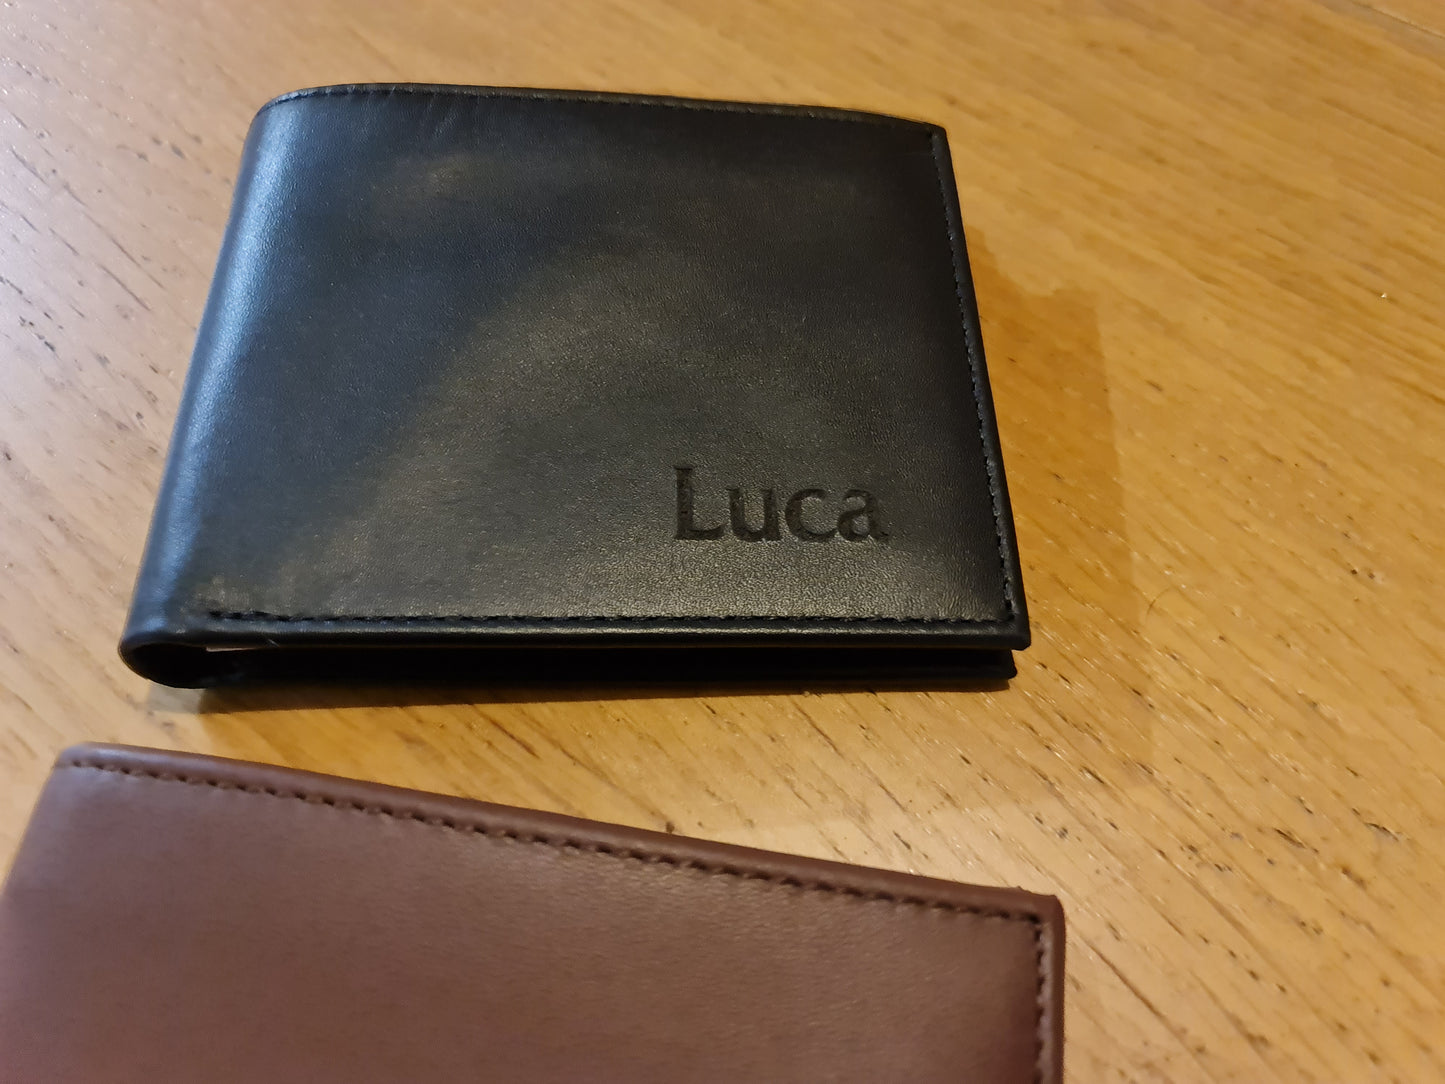 Personalised Engraved Leather Men's Wallet - TWO Colour Options